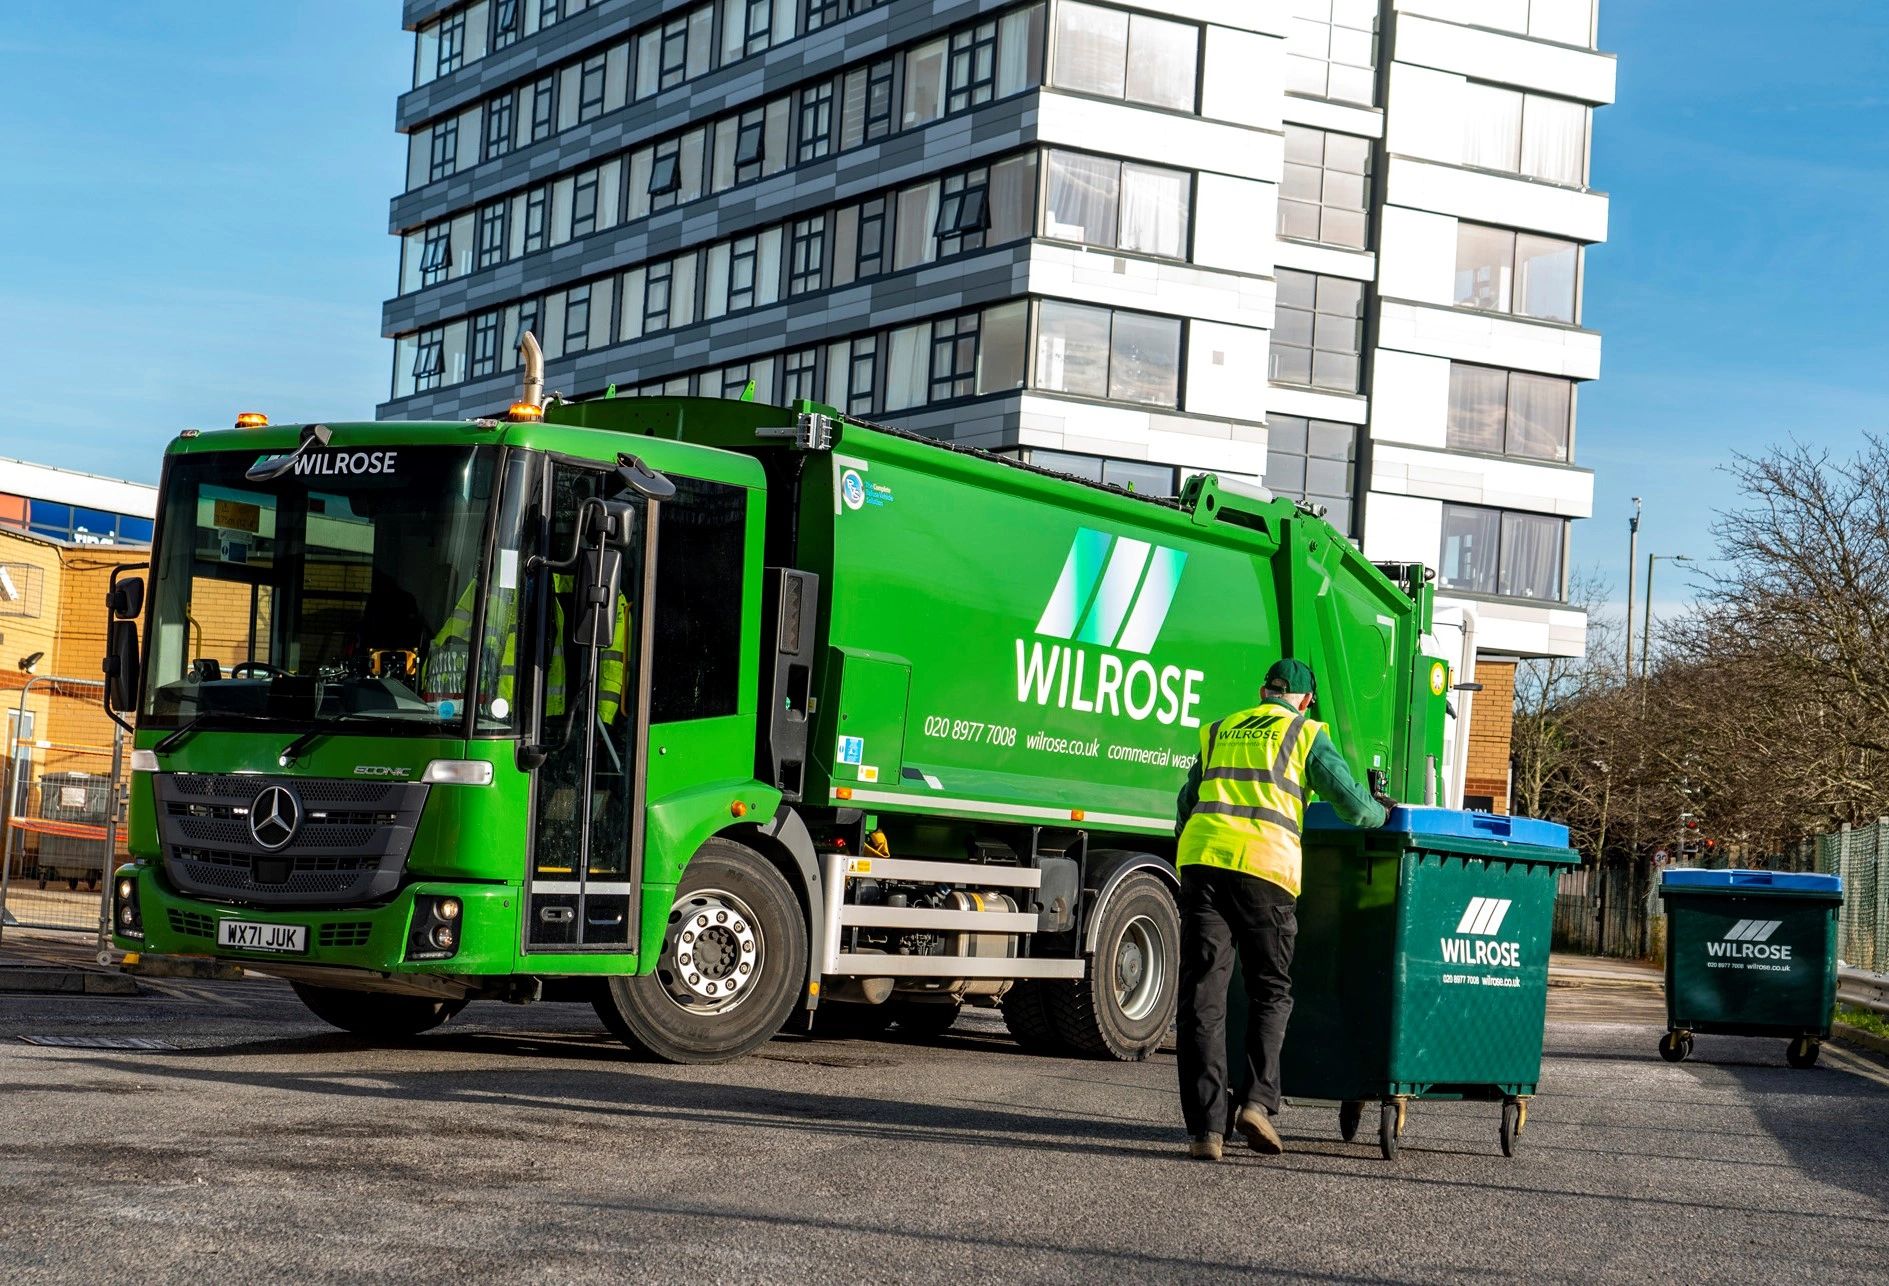 Wilrose dustcart collecting commercial waste in Wembley, Middlesex.